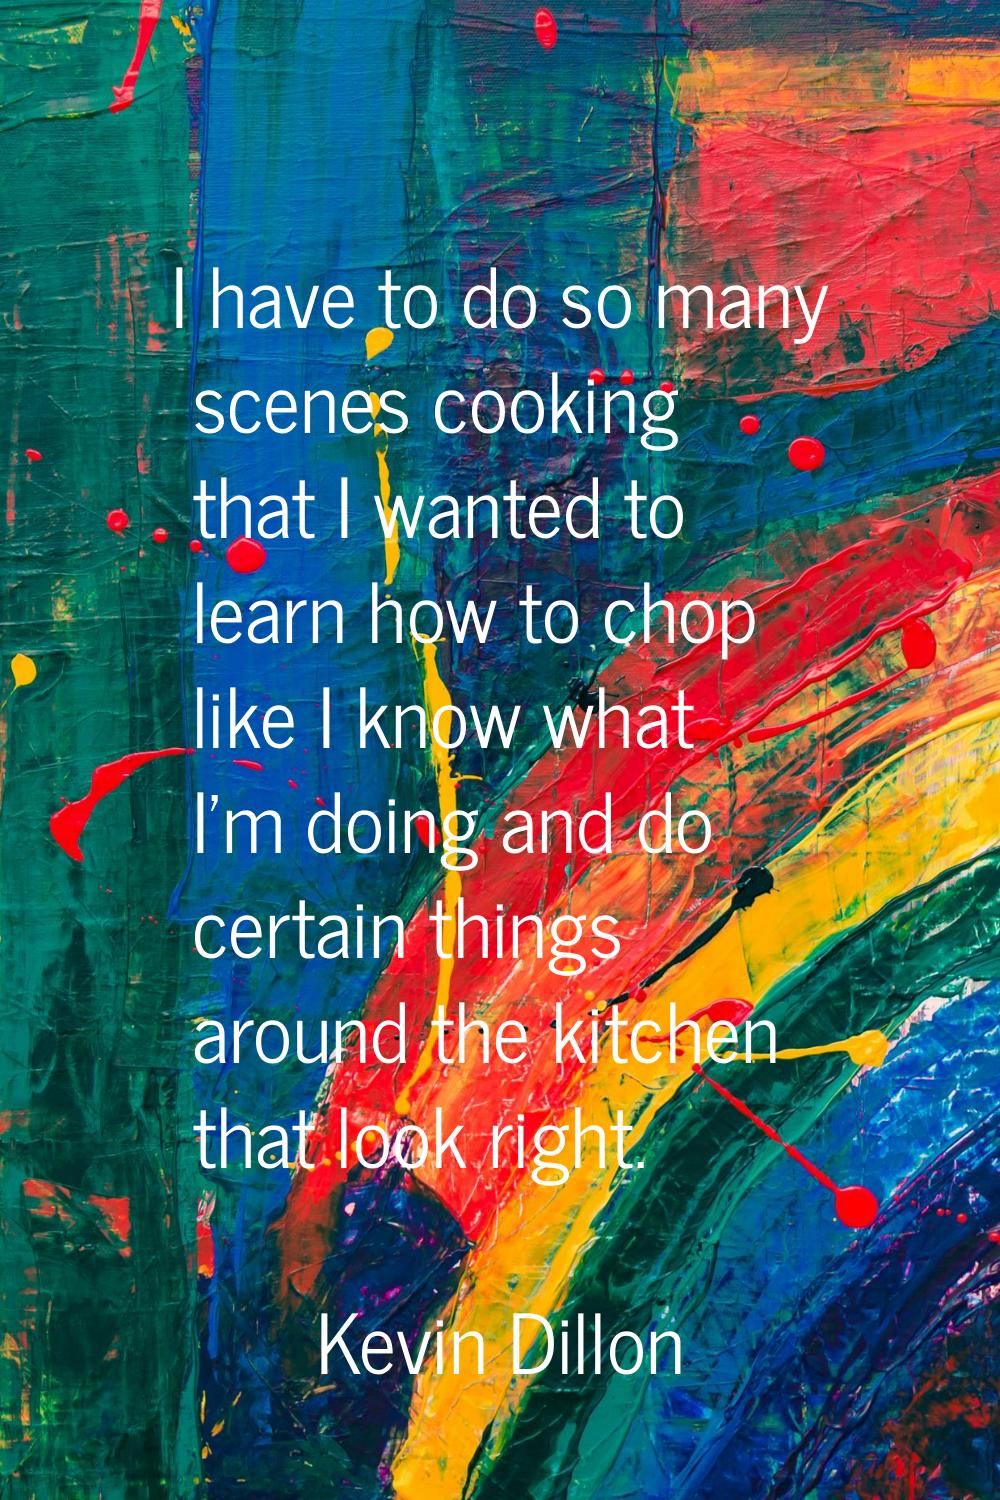 I have to do so many scenes cooking that I wanted to learn how to chop like I know what I'm doing a